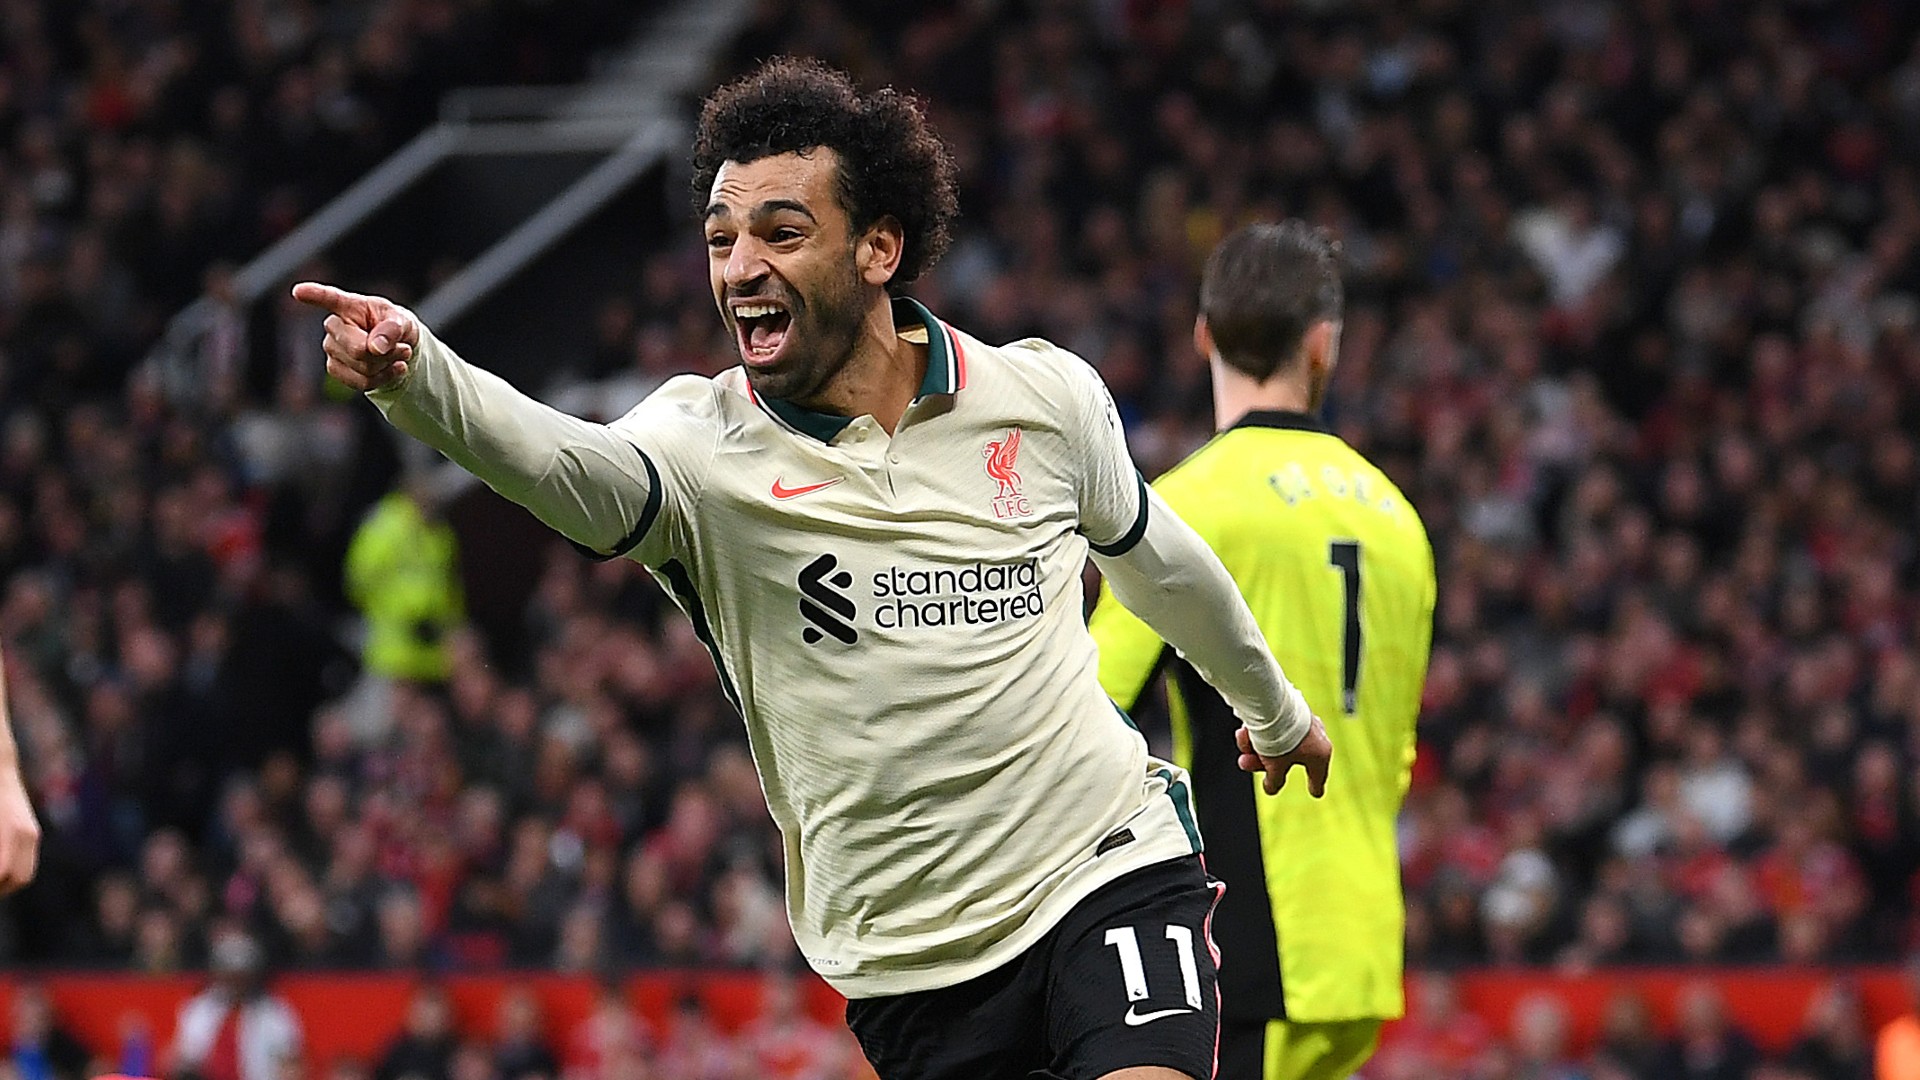 Bent advises Salah: If Barca or Real Madrid came in for me right now, I would stay at Liverpool